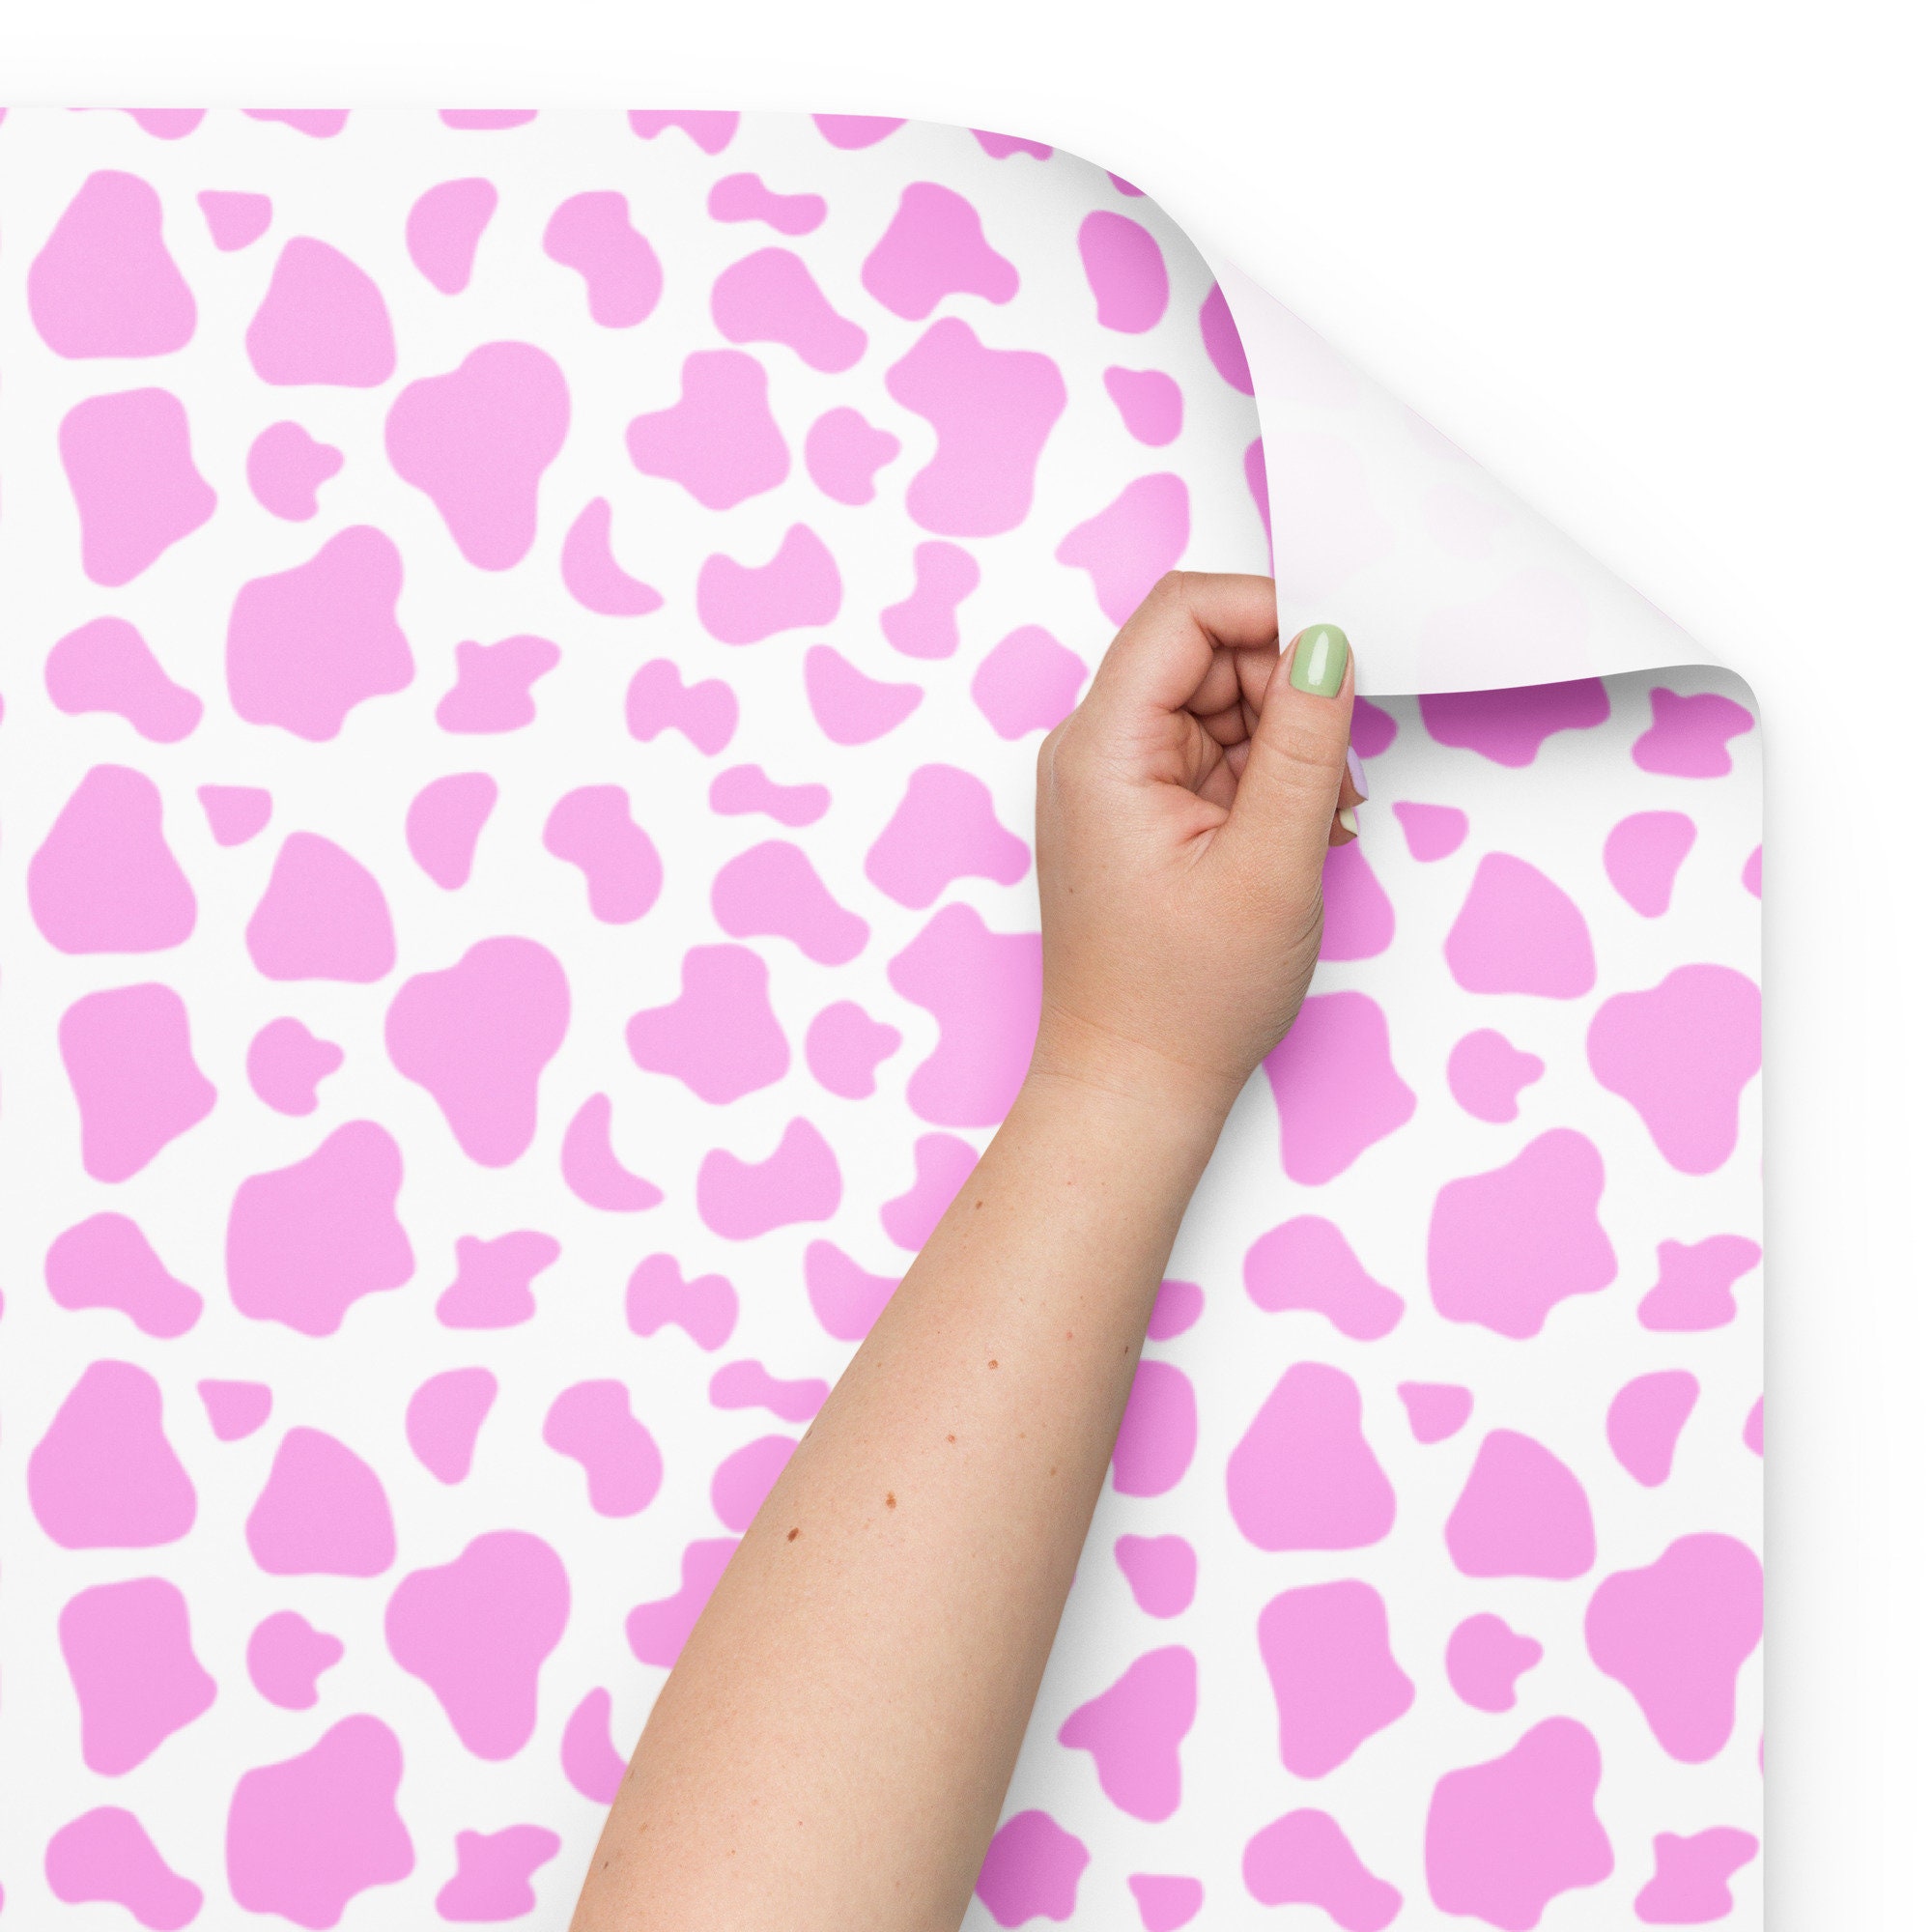 Pink Cow Print Wrapping Paper by socoart